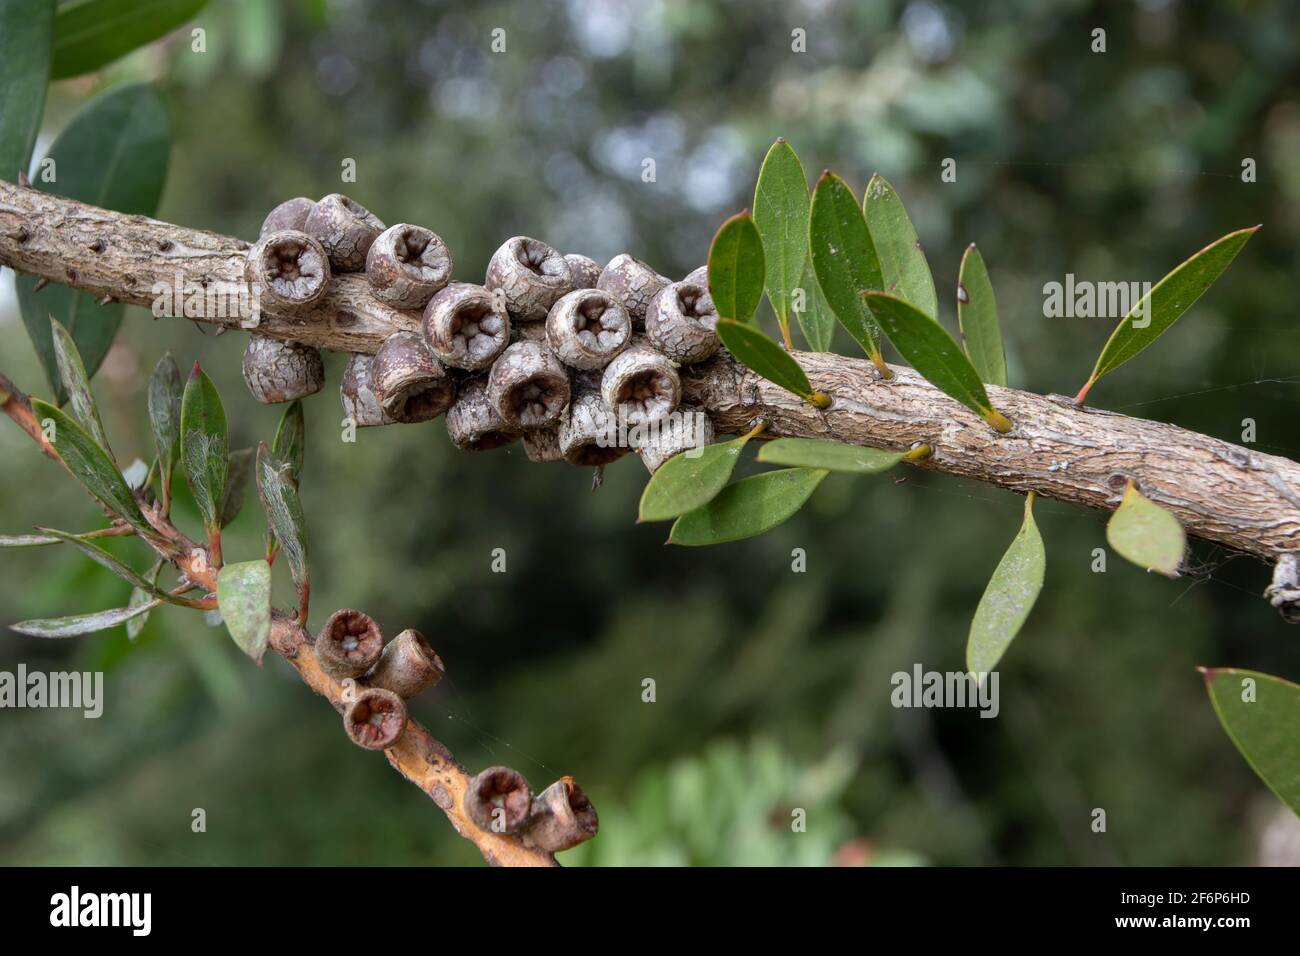 Callistemon rigidus or melaleuca linearis or narrow-leaved bottlebrush branch with leaves and woody capsules fruits Stock Photo